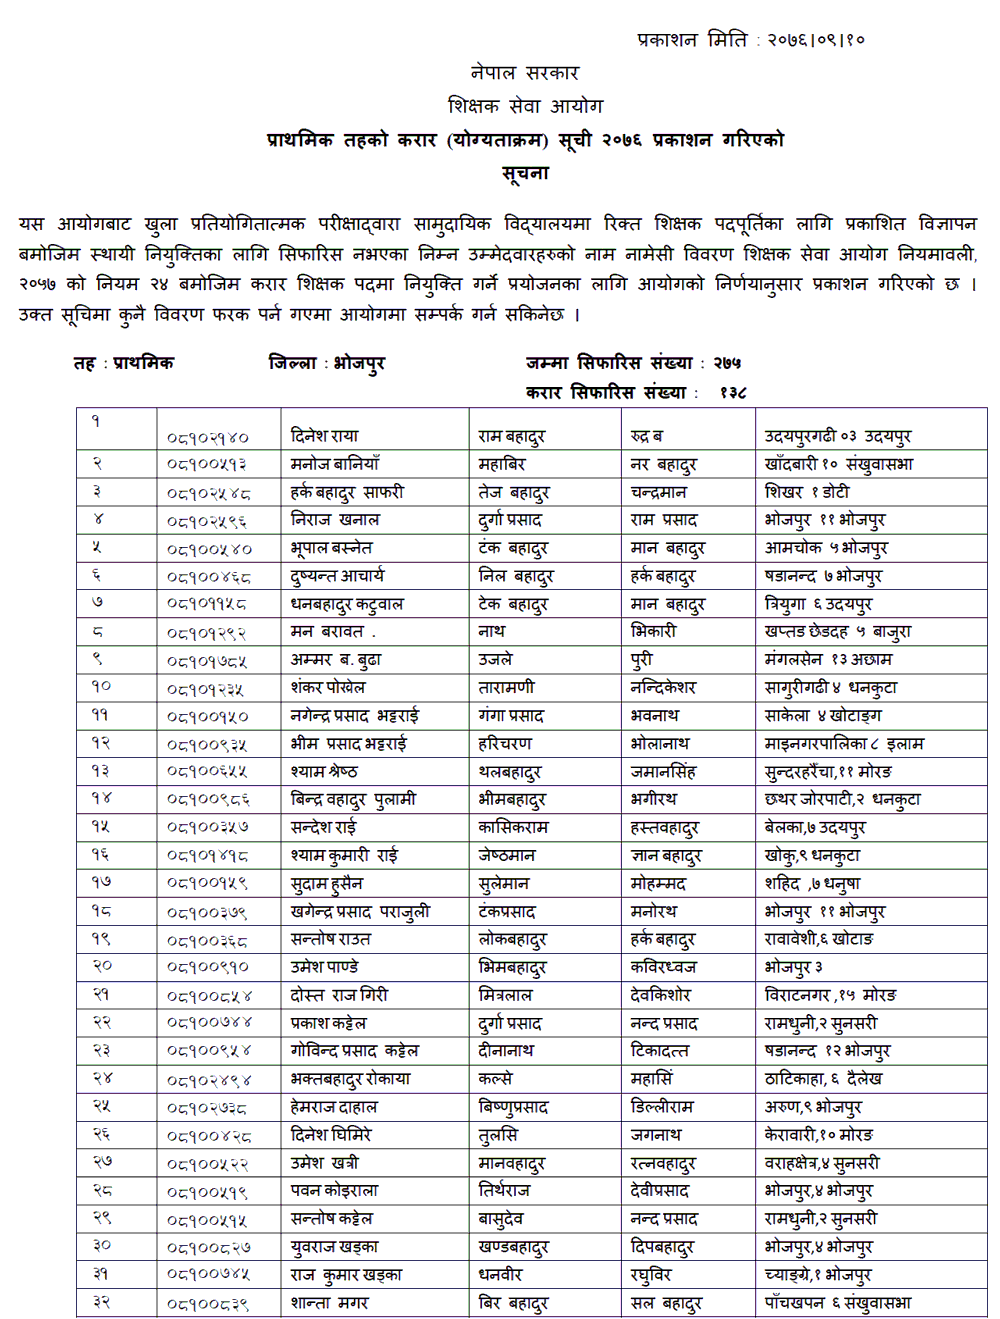 TSC Published Primary Level Contract List of Solukhumbu and Bhojpur